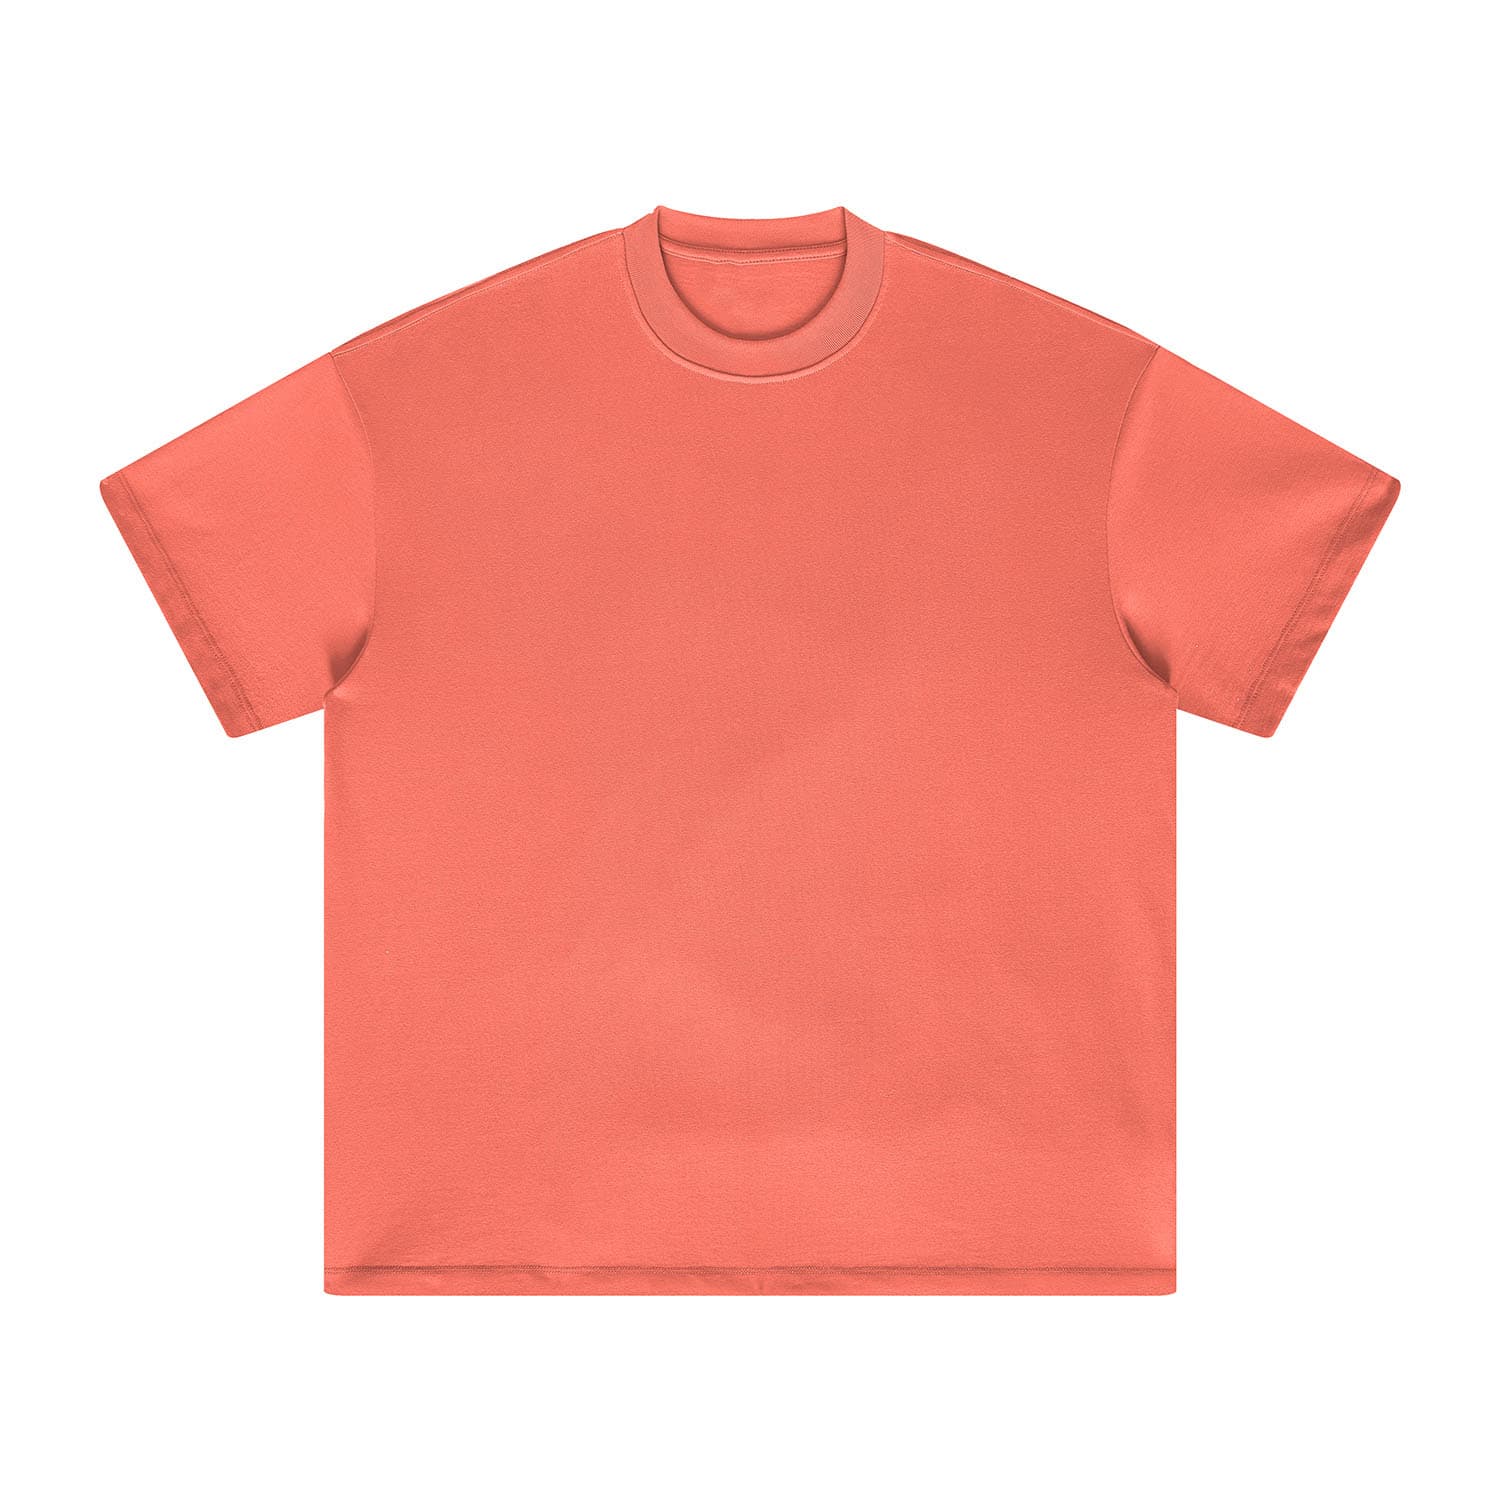 Oversized Tee 305GSM-Watermelon red